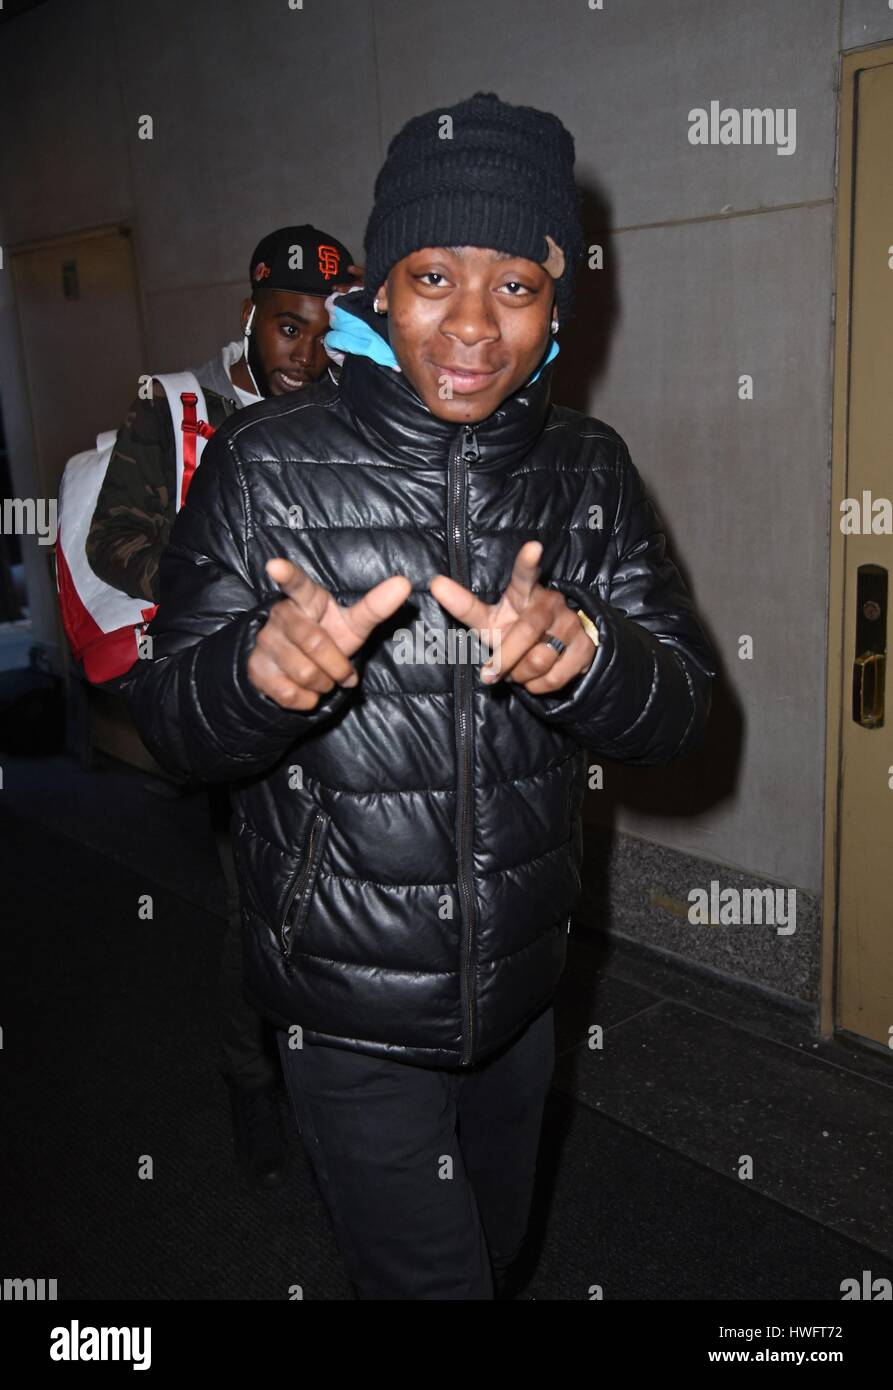 New York, NY, USA. 20th Mar, 2017. RJ Cyler out and about for Celebrity Candids - MON, New York, NY March 20, 2017. Credit: Derek Storm/Everett Collection/Alamy Live News Stock Photo